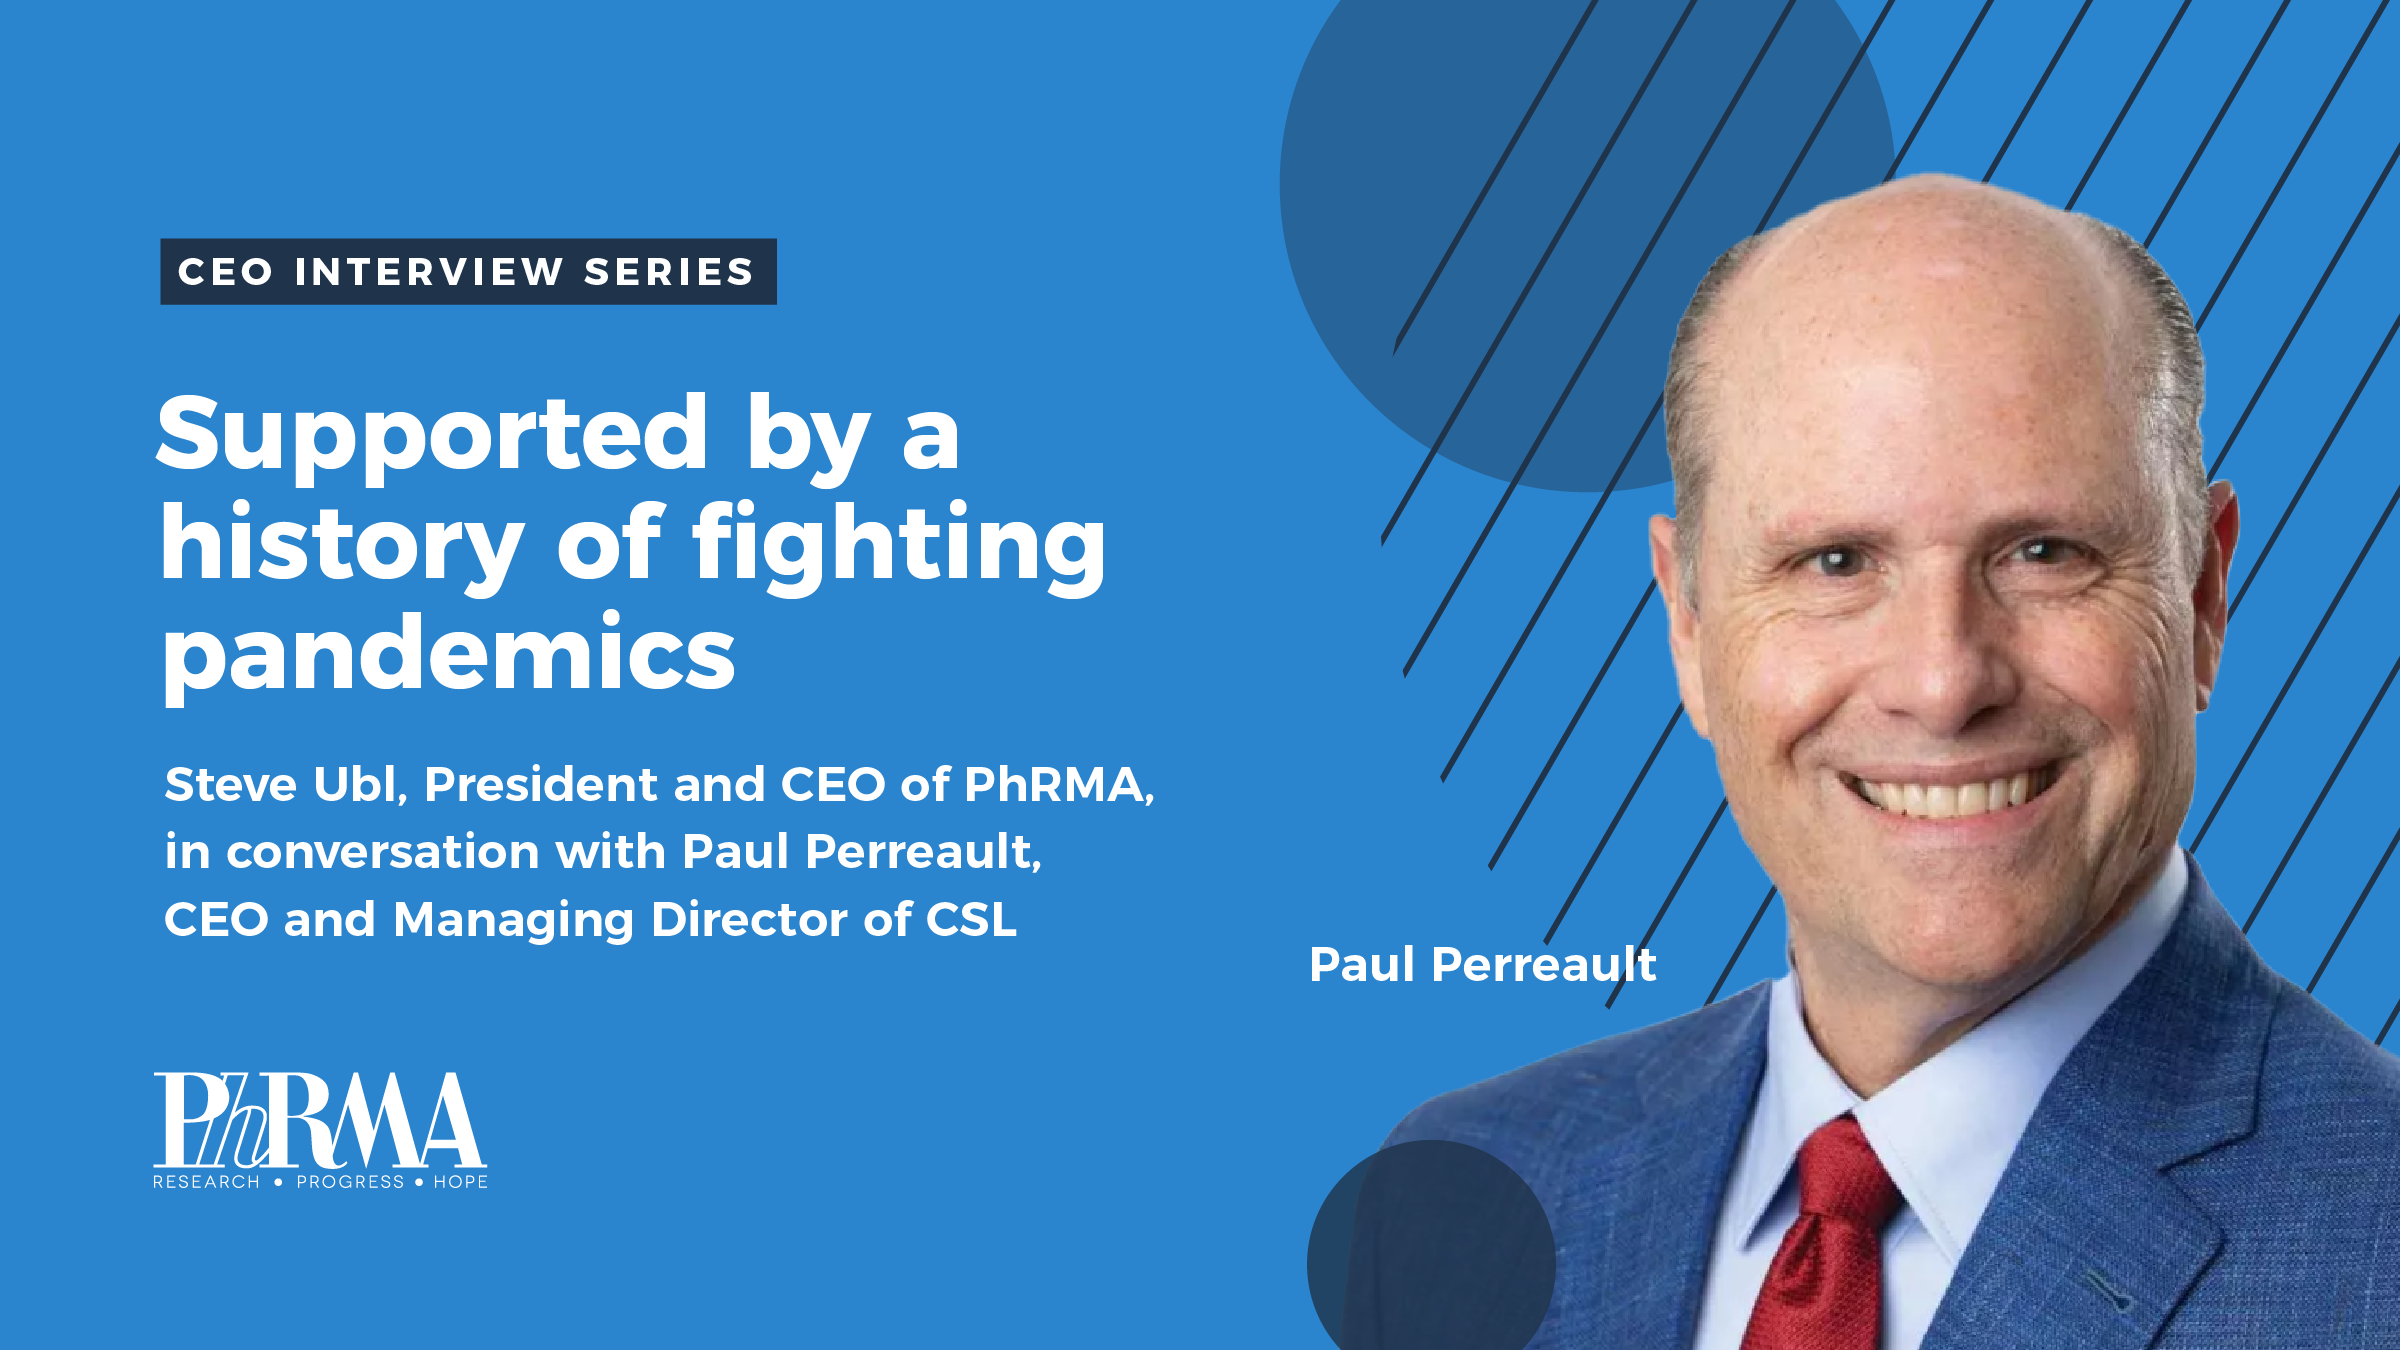 Coming together to fight COVID-19: A conversation with Paul Perreault, CEO and Managing Director of CSL